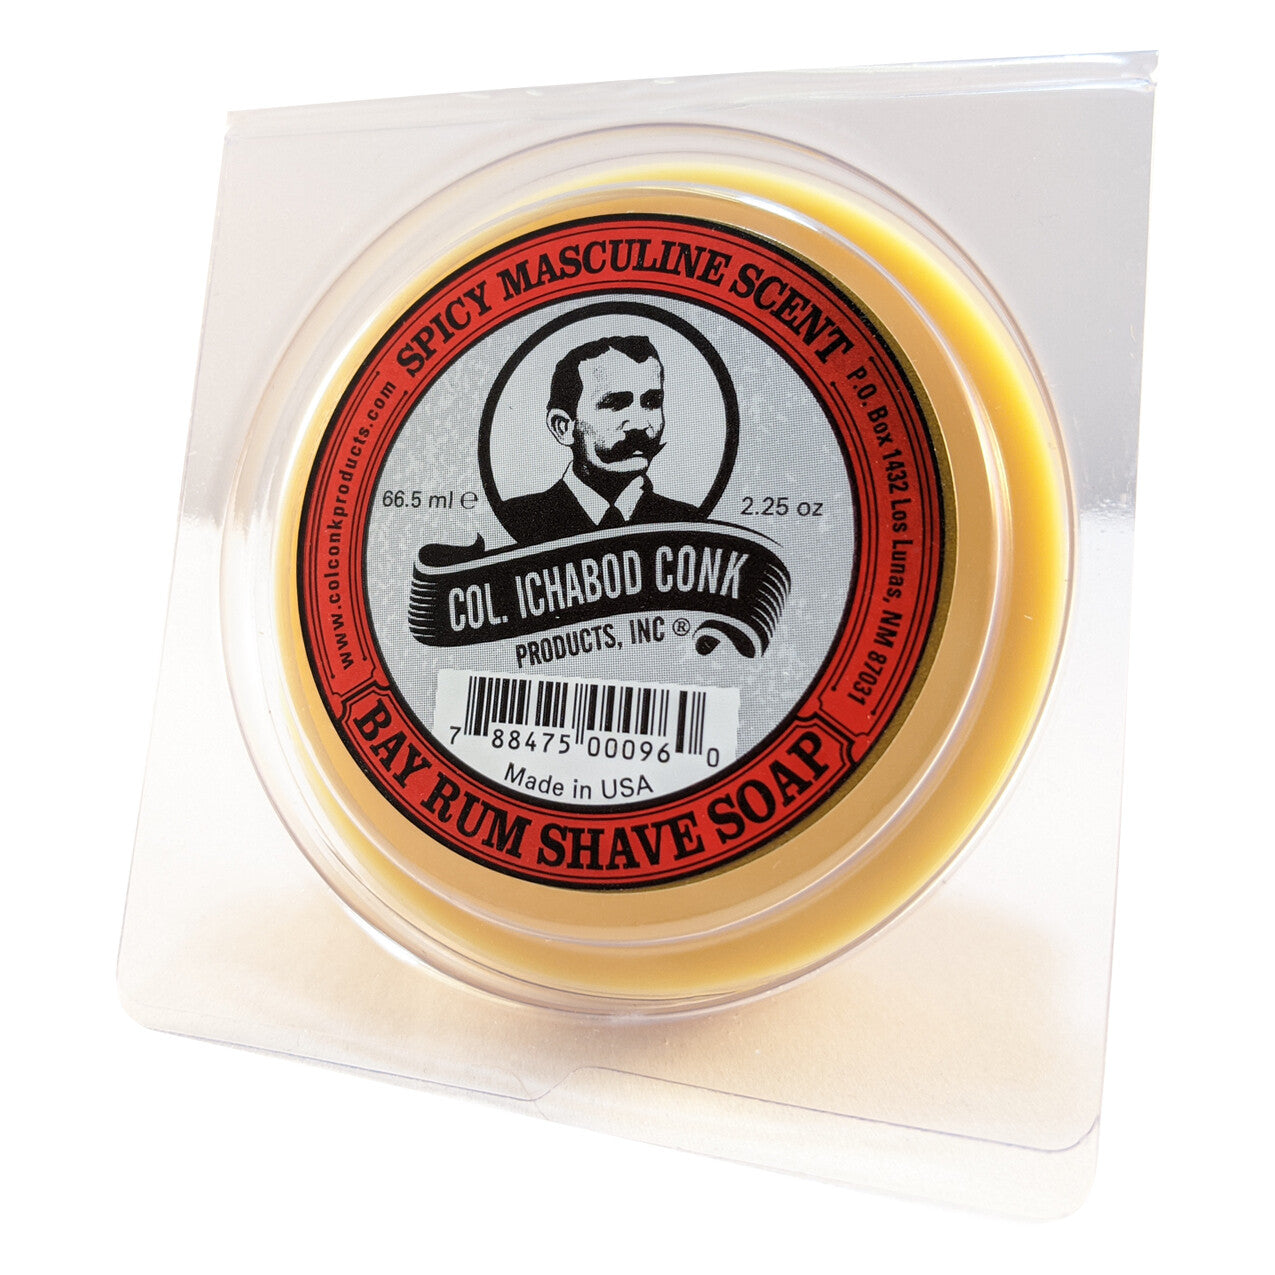 COL. ICHABOD CONK®SHAVE SOAP